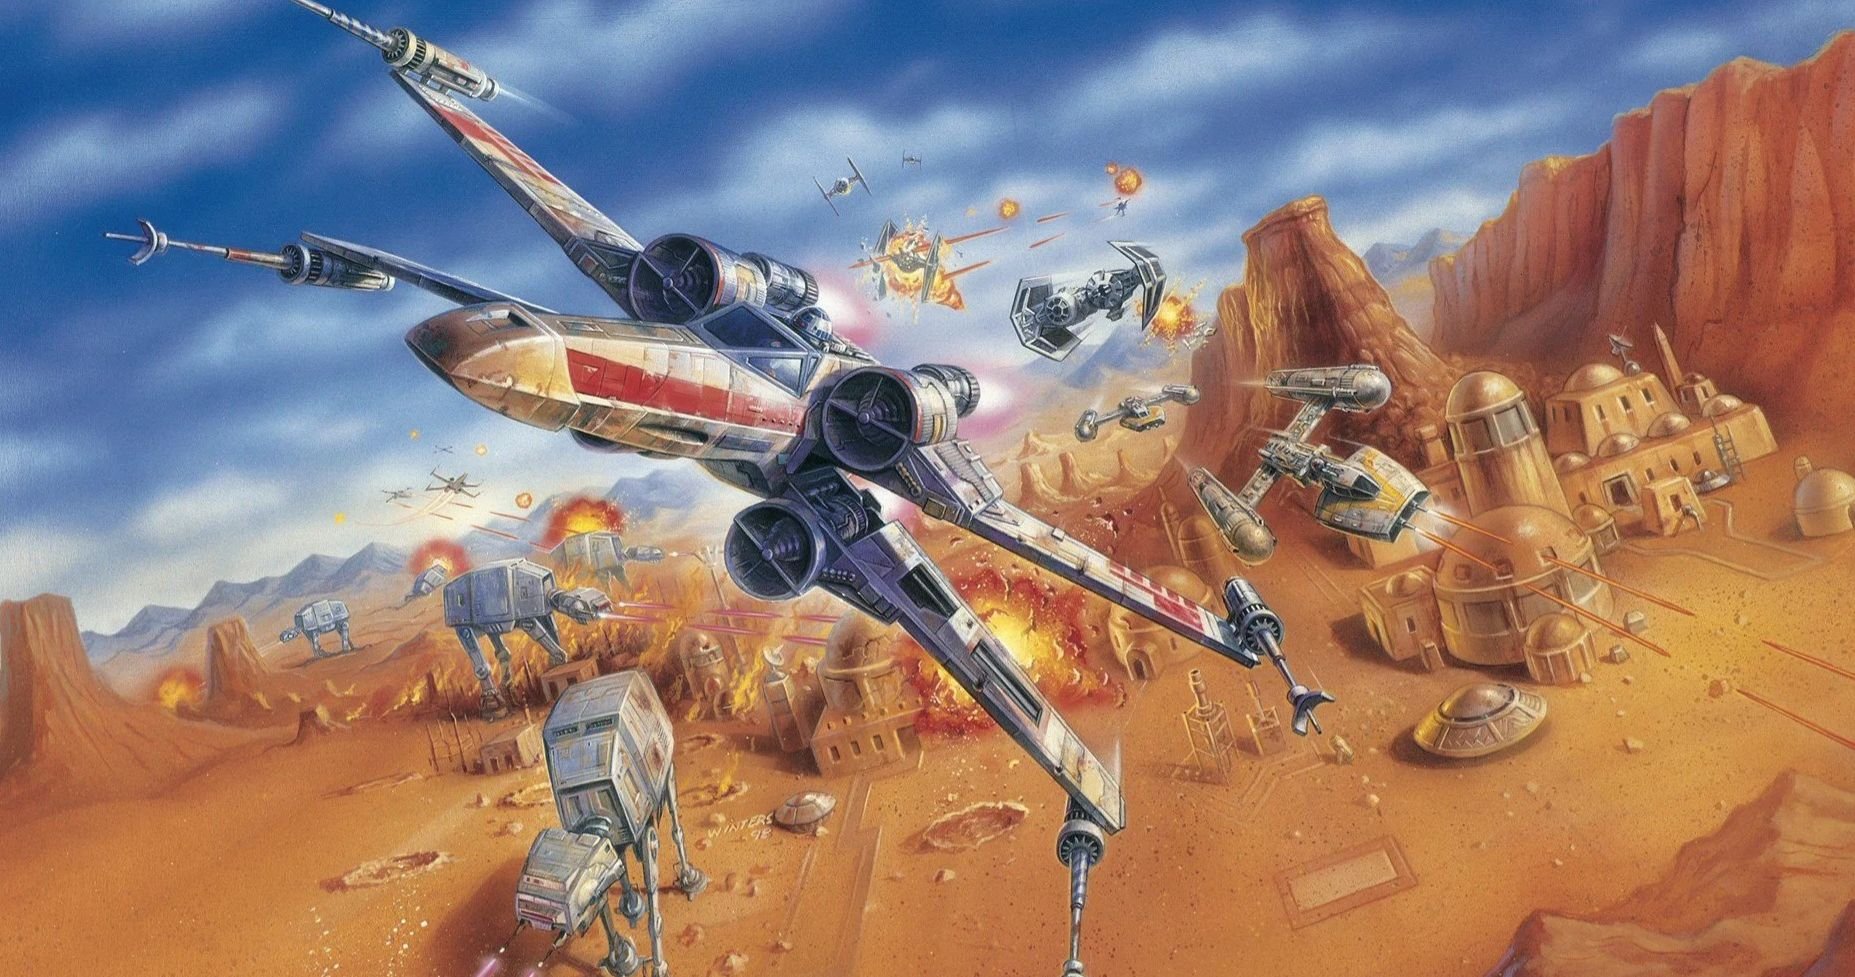 Rogue Squadron Movie Recruits Love and Monsters Writer for Next Star Wars Adventure